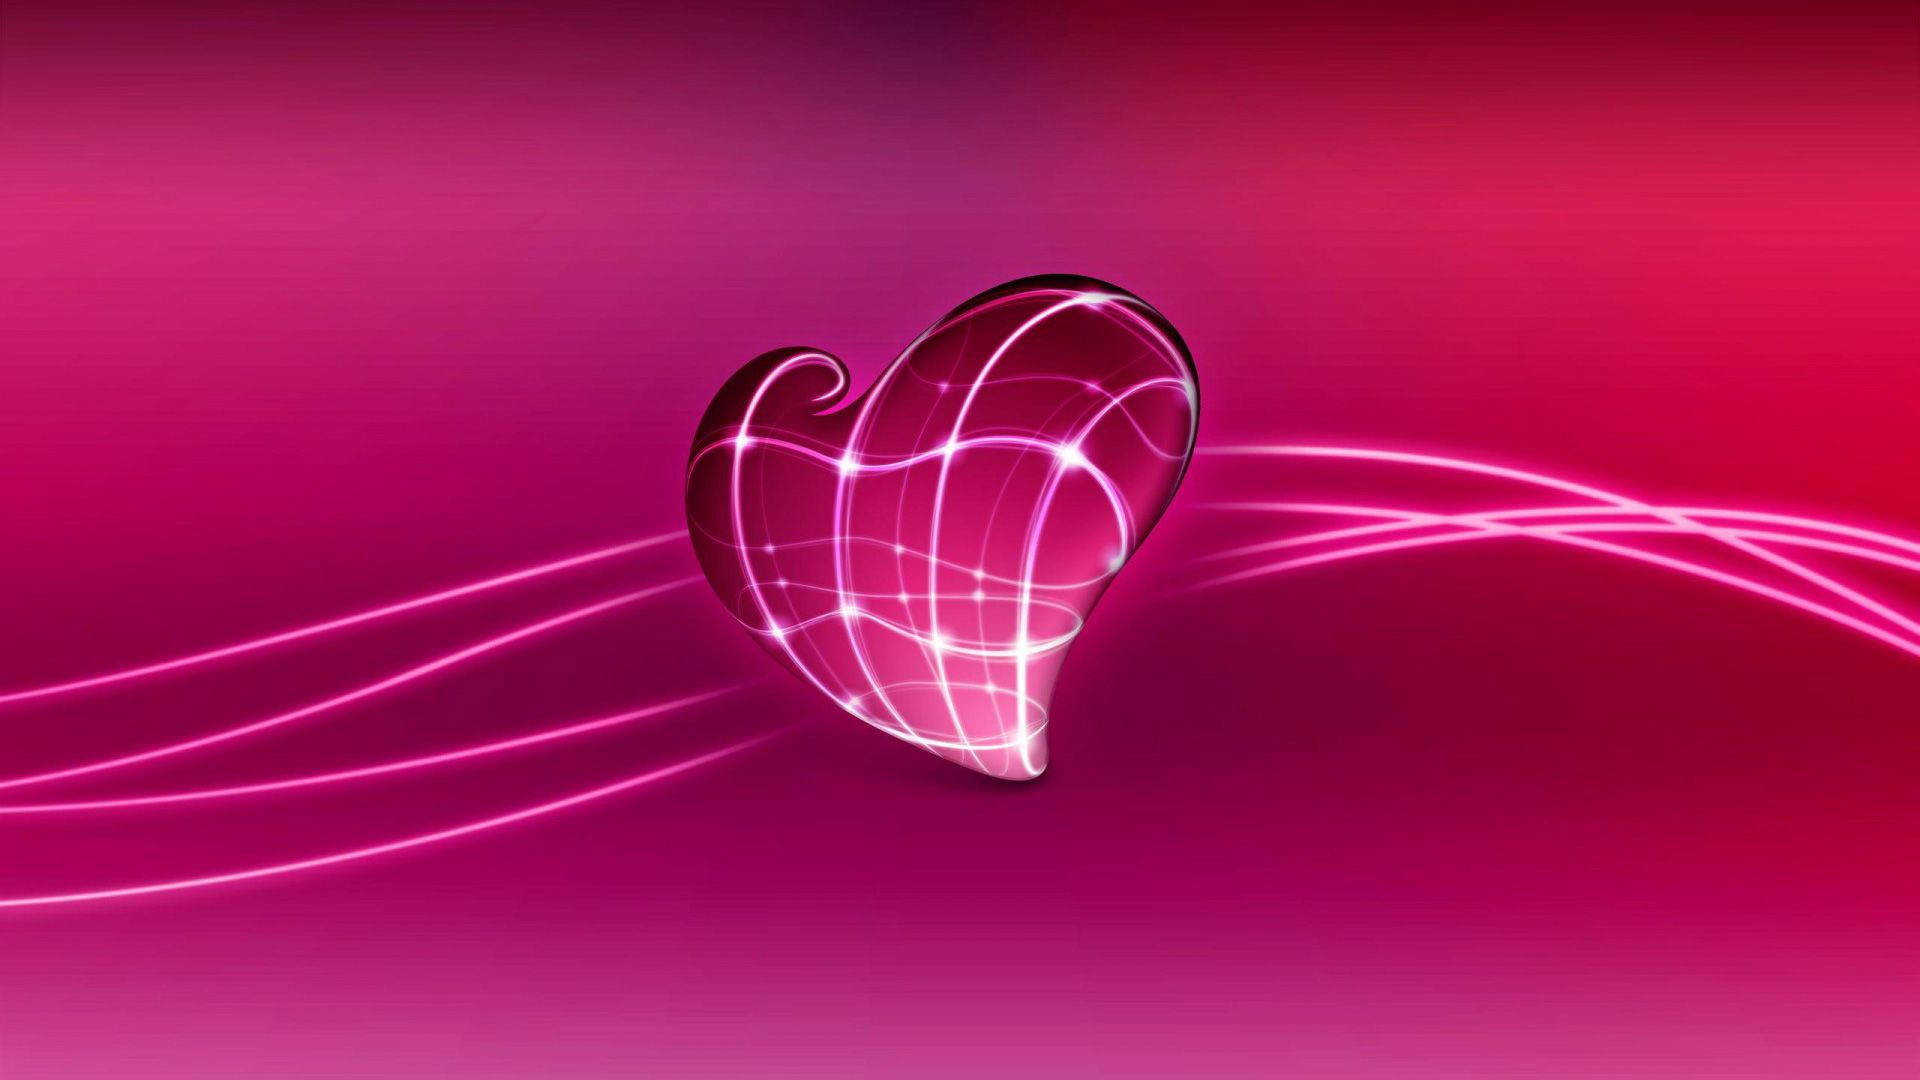 Abstract Pink Love Heart Background